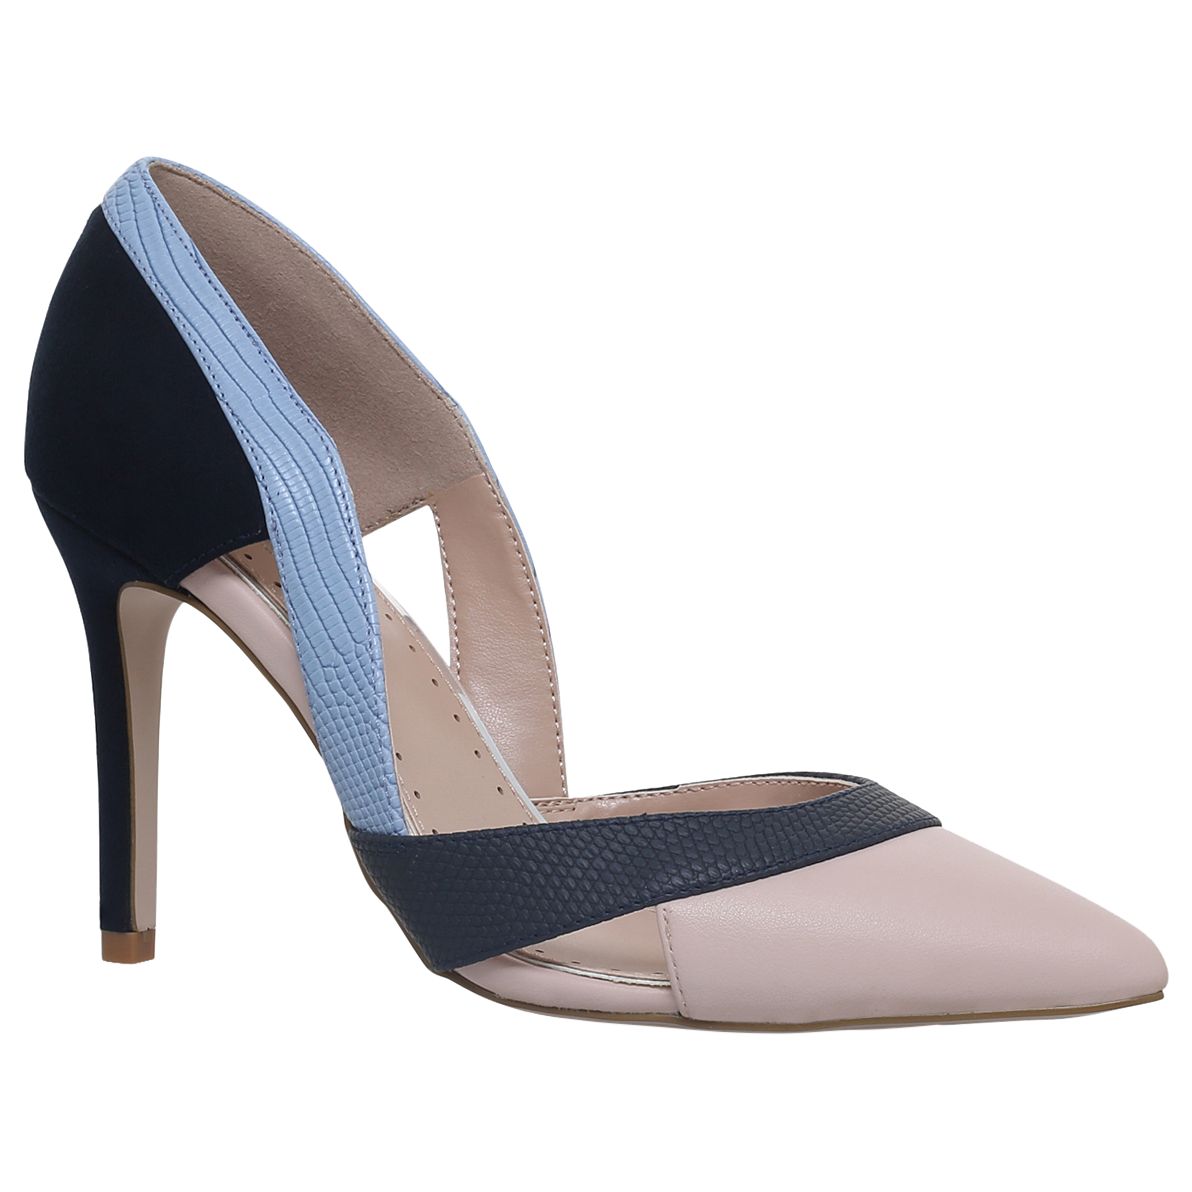 Miss KG Ceile Pointed Toe Court Shoes, Nude